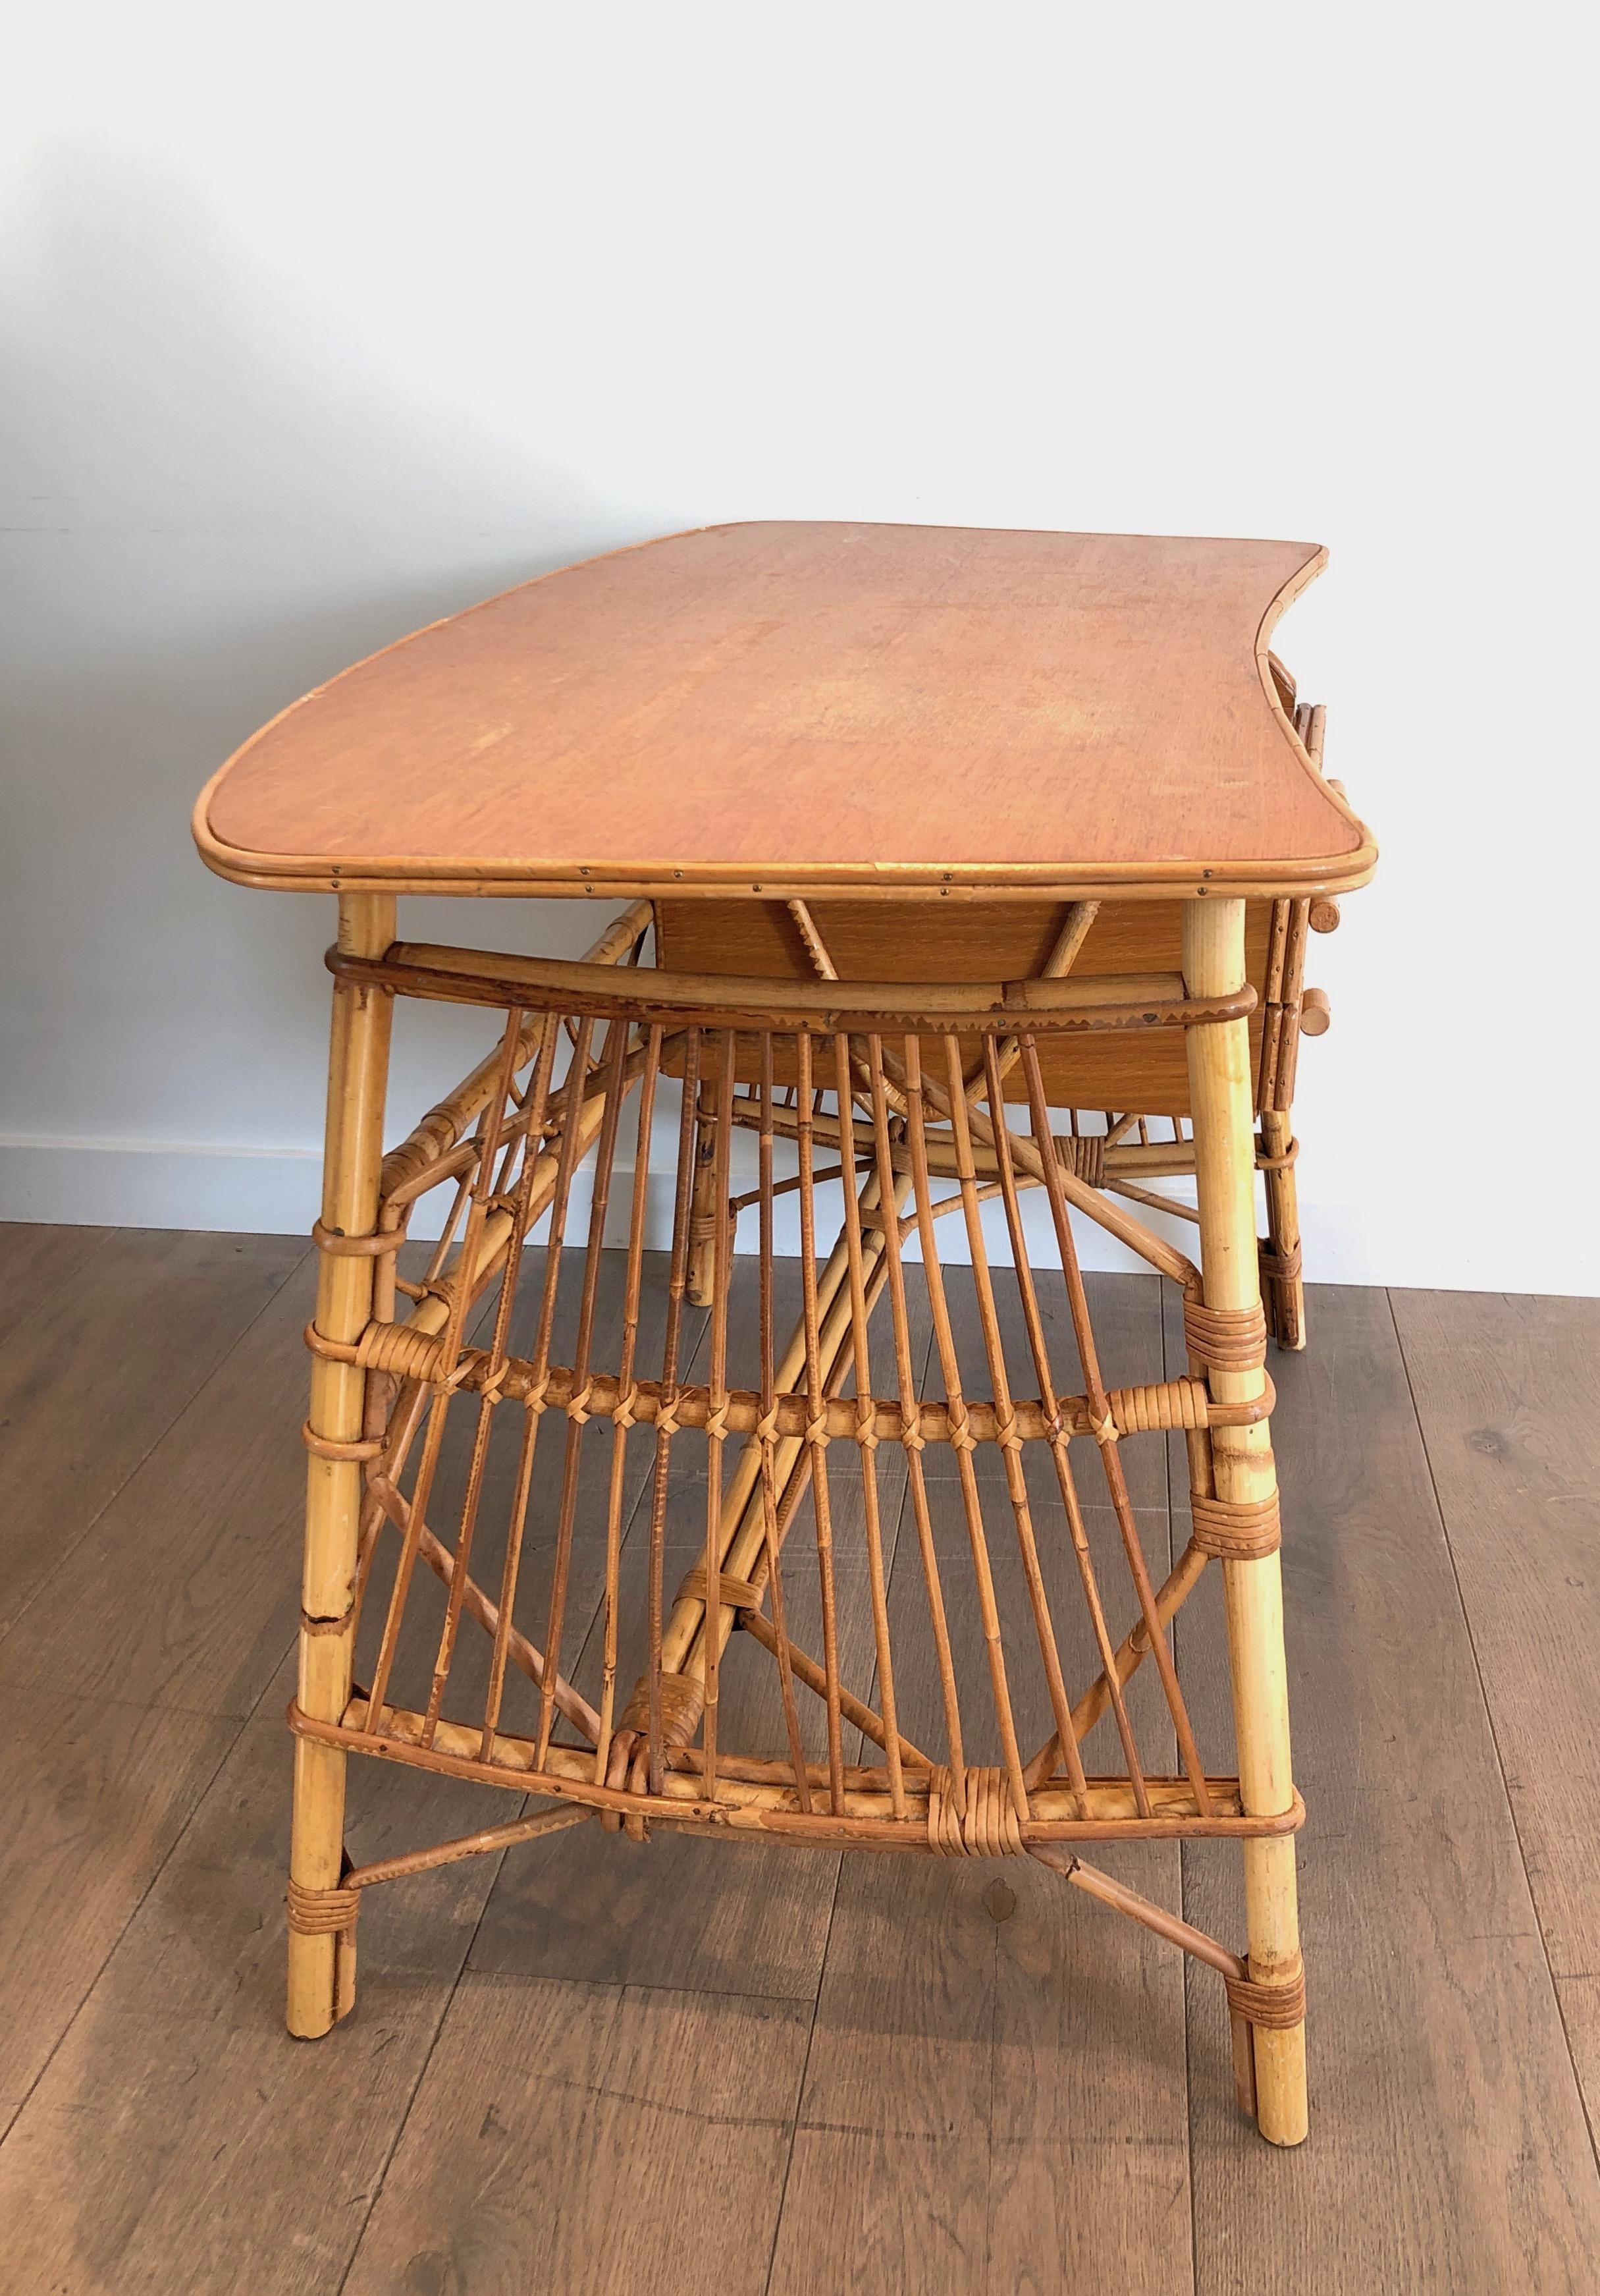 Attributed to Audoux Minet, Rattan Desk with Drawers, French, Circa 1970 For Sale 2